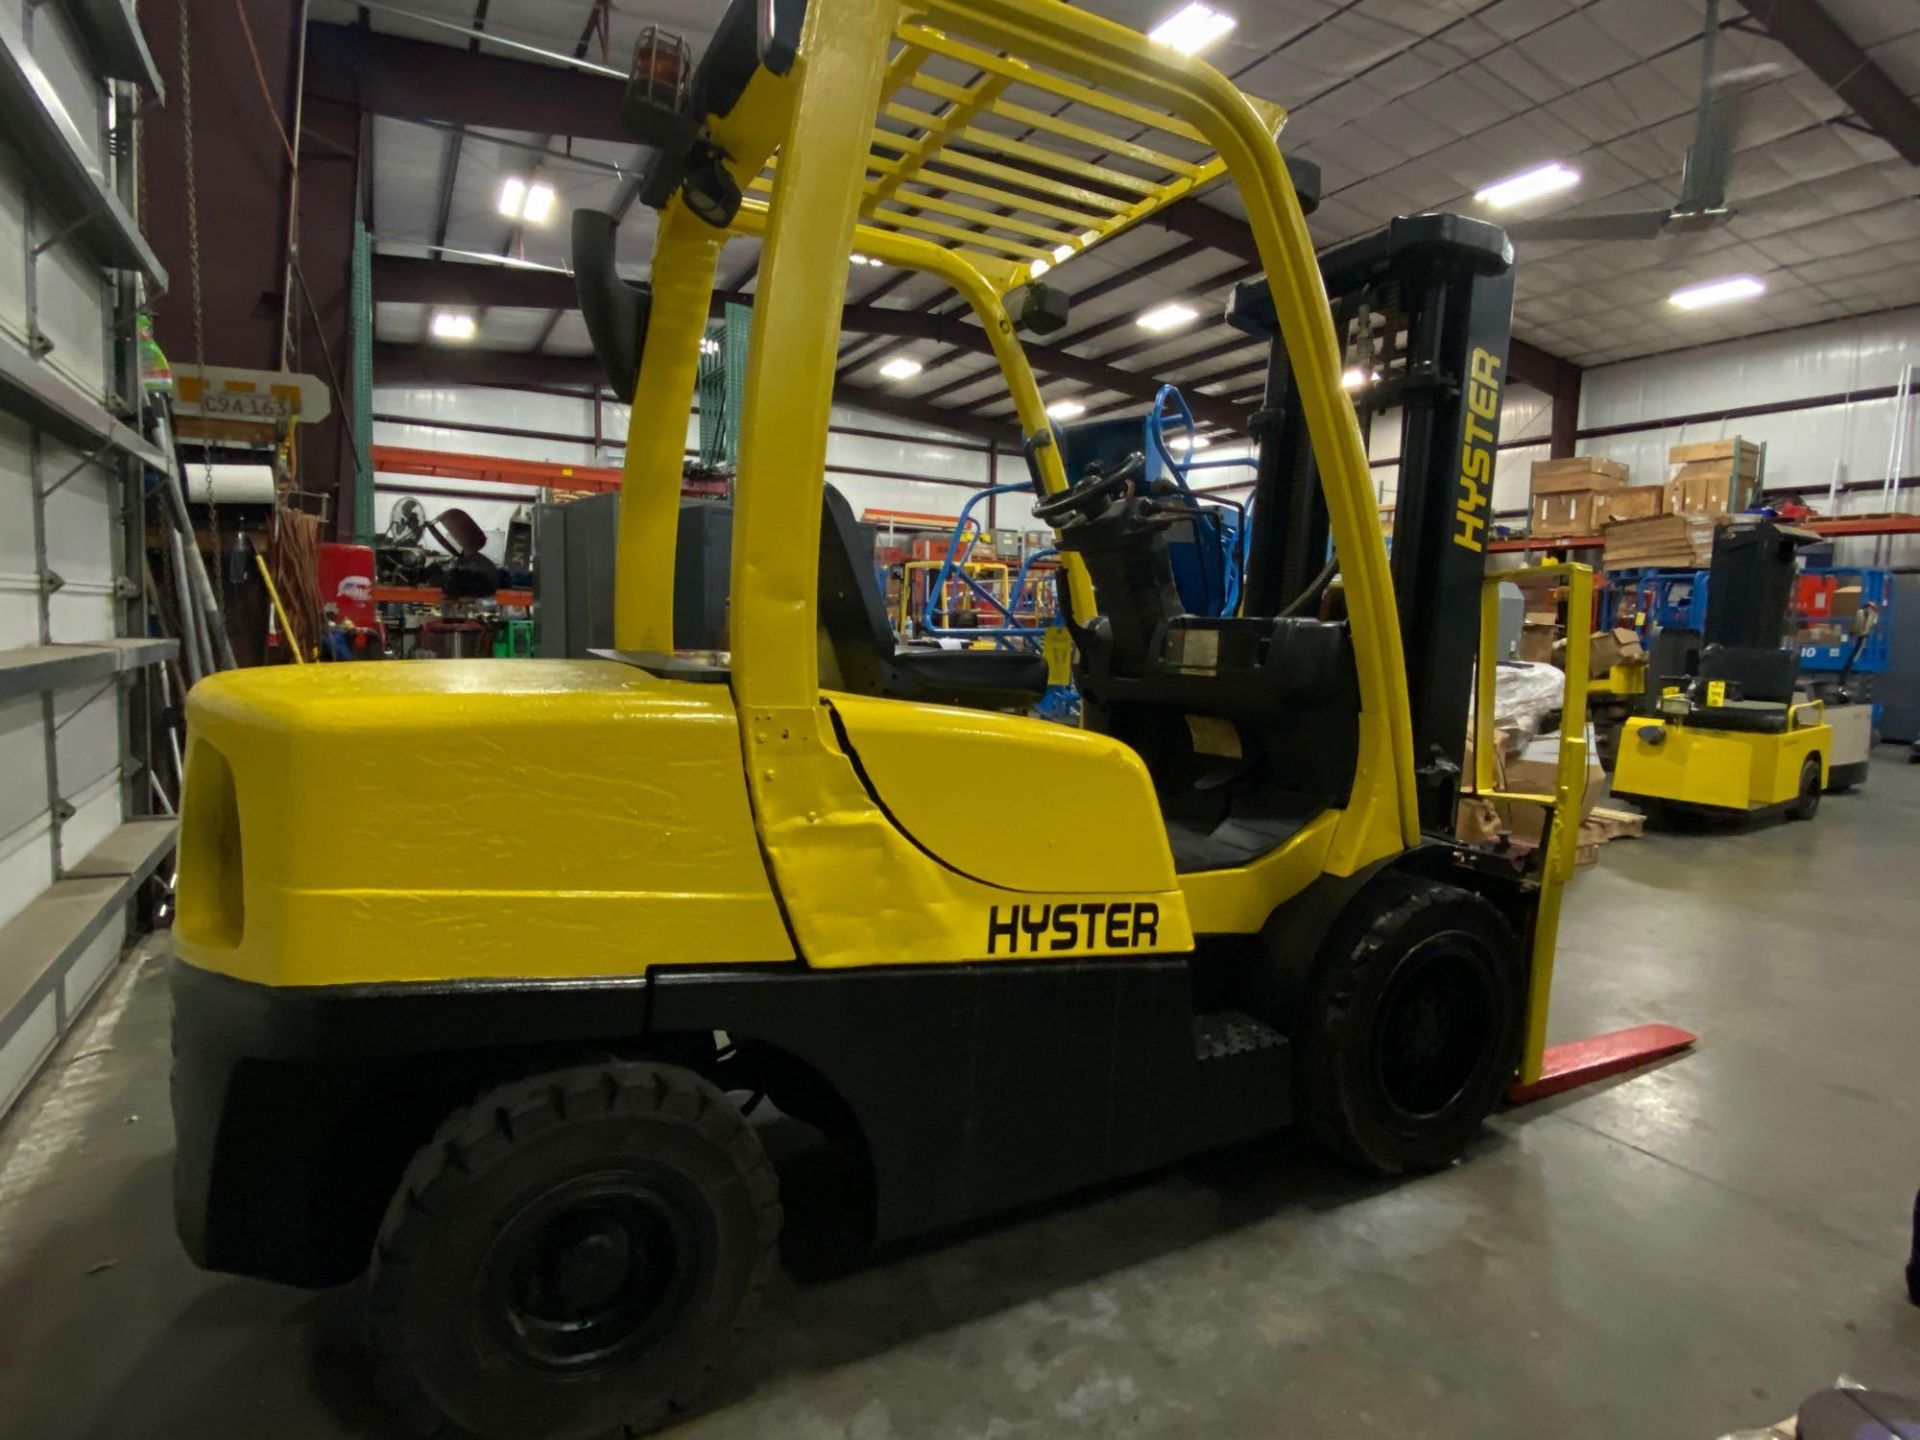 HYSTER H70FT FORKLIFT, APPROX. 7,000 LB CAPACITY, 181.9" HEIGHT CAP, TILT, RUNS AND OPERATES - Image 3 of 10